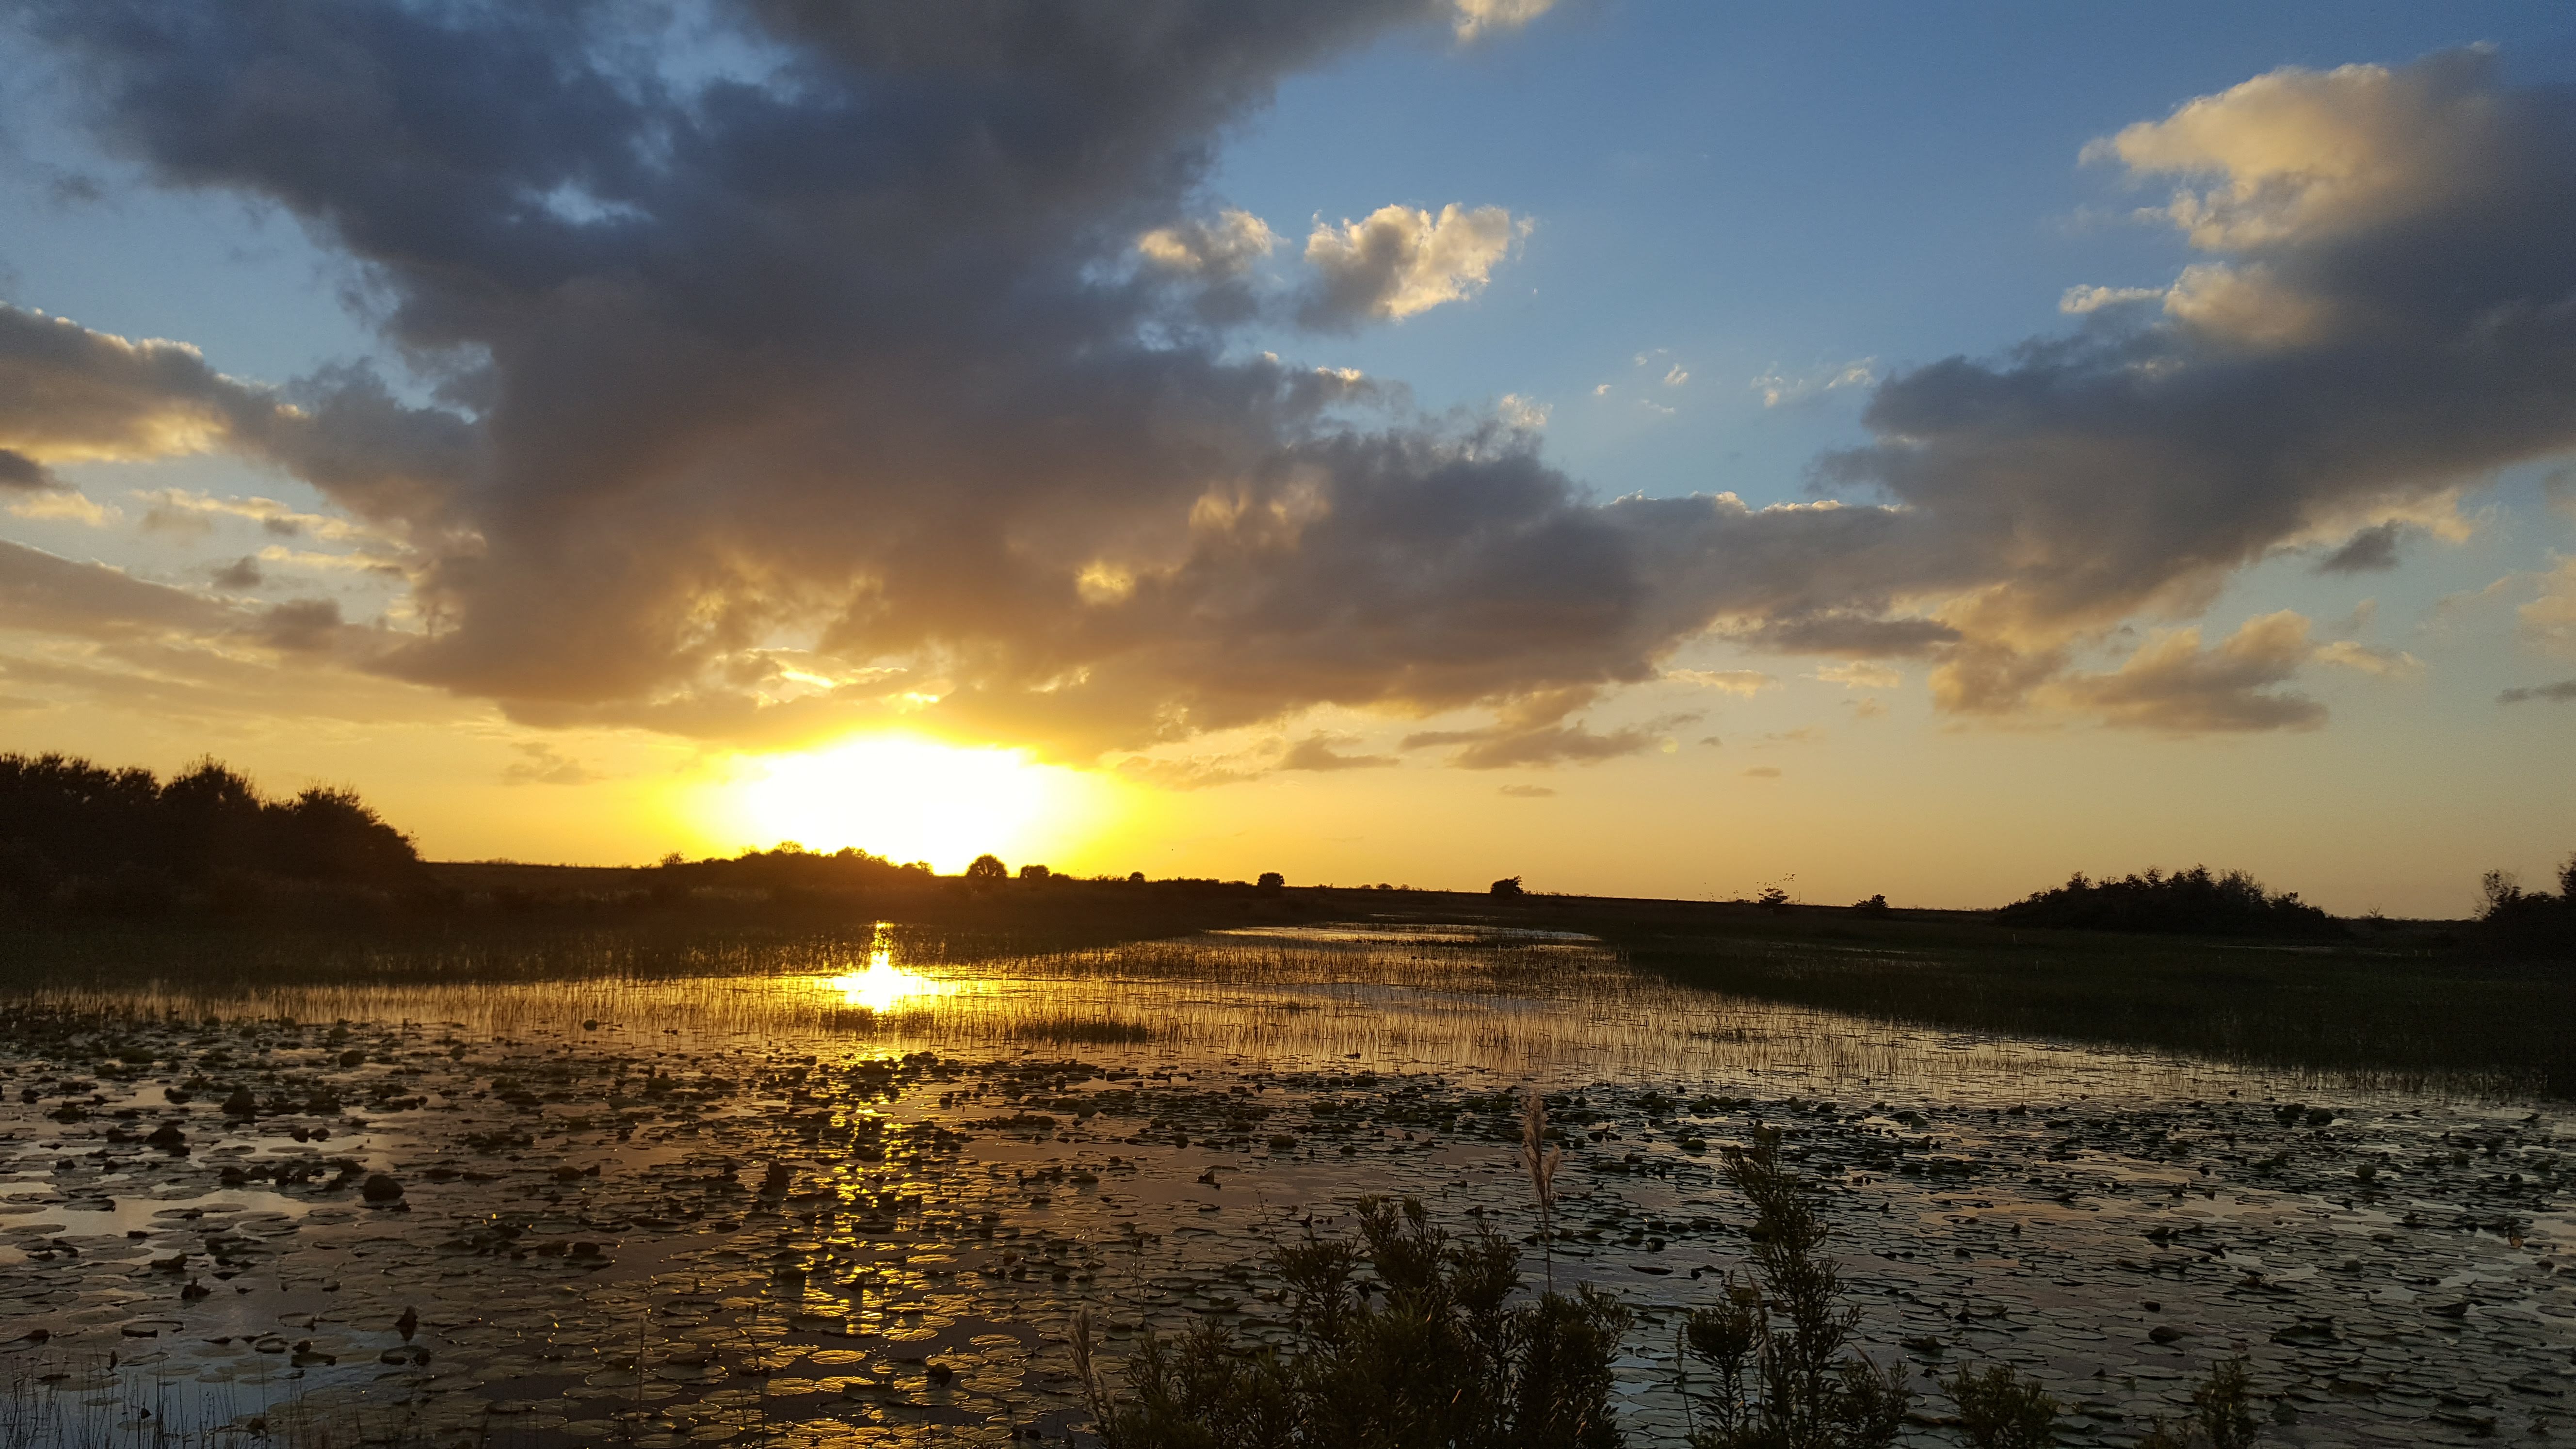 Sunset in the C Impoundments at A.R.M. Loxahatchee NWR